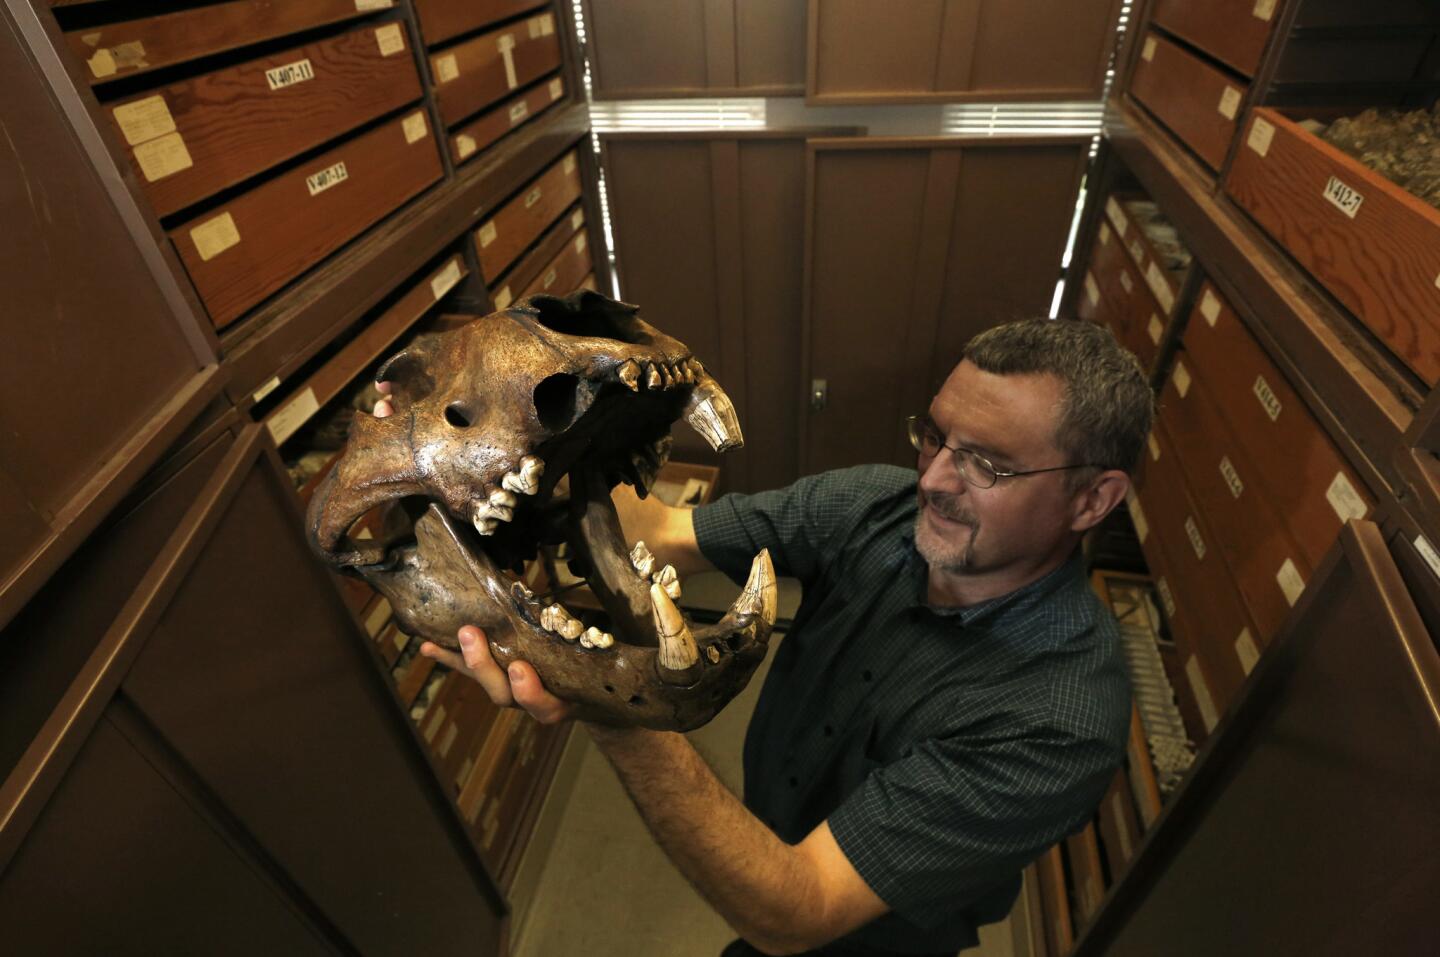 Paleontologist Robert Dundas holds an ancient tiger skull, part of the vast collection of La Brea Tar Pits artifacts stored in the UC Berkeley bell tower.